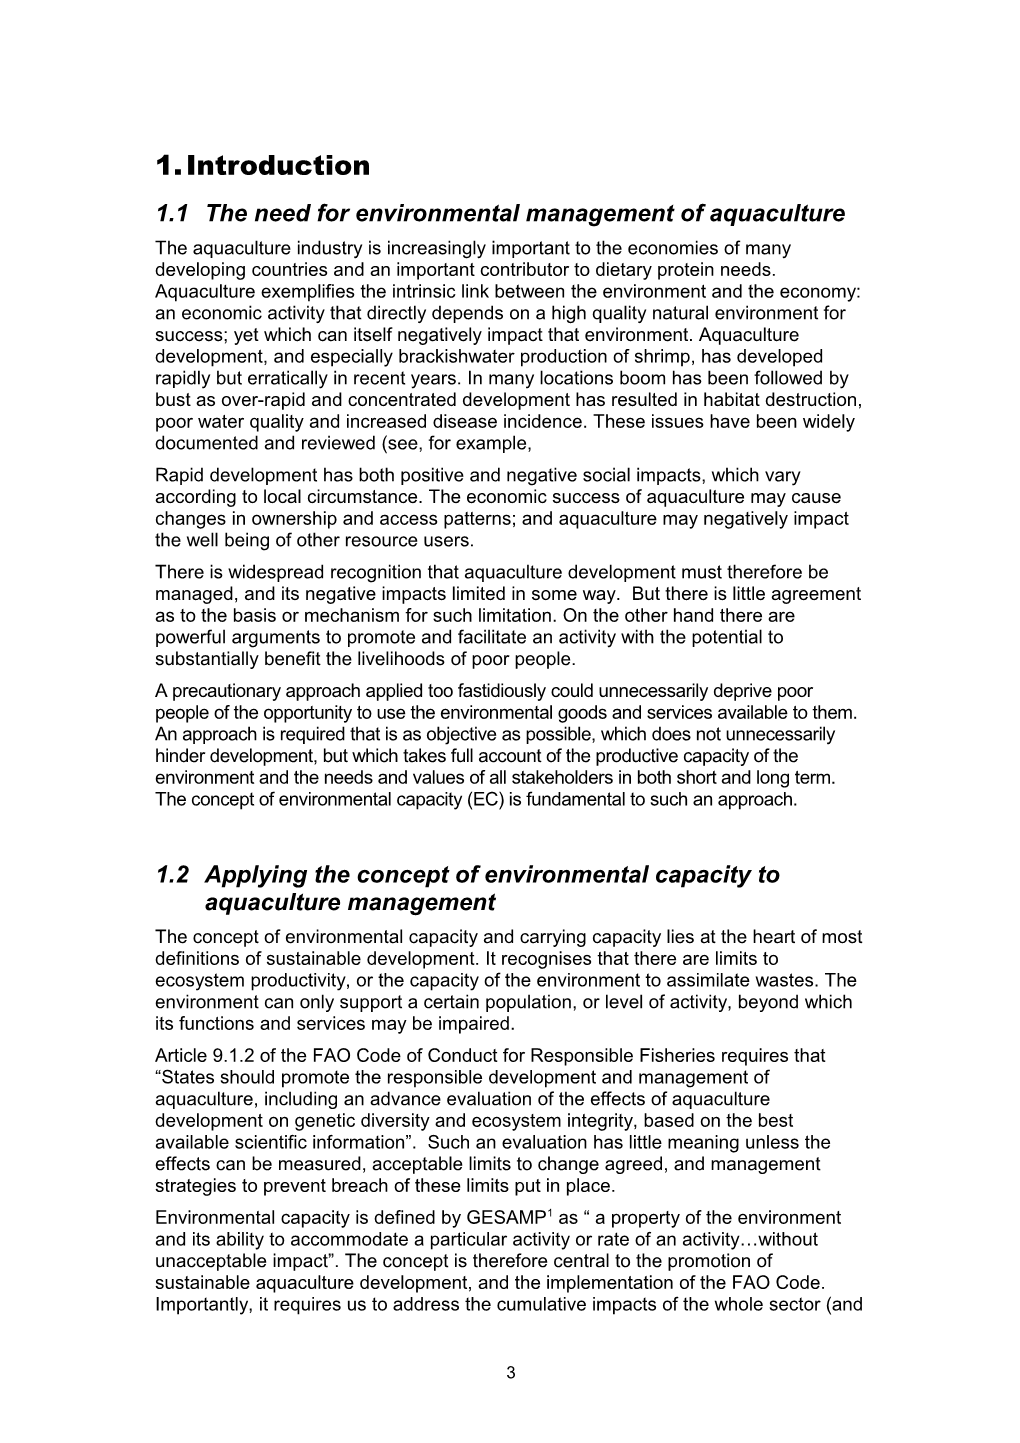 The Application of Environmental Capacity in Tropical Aquaculture